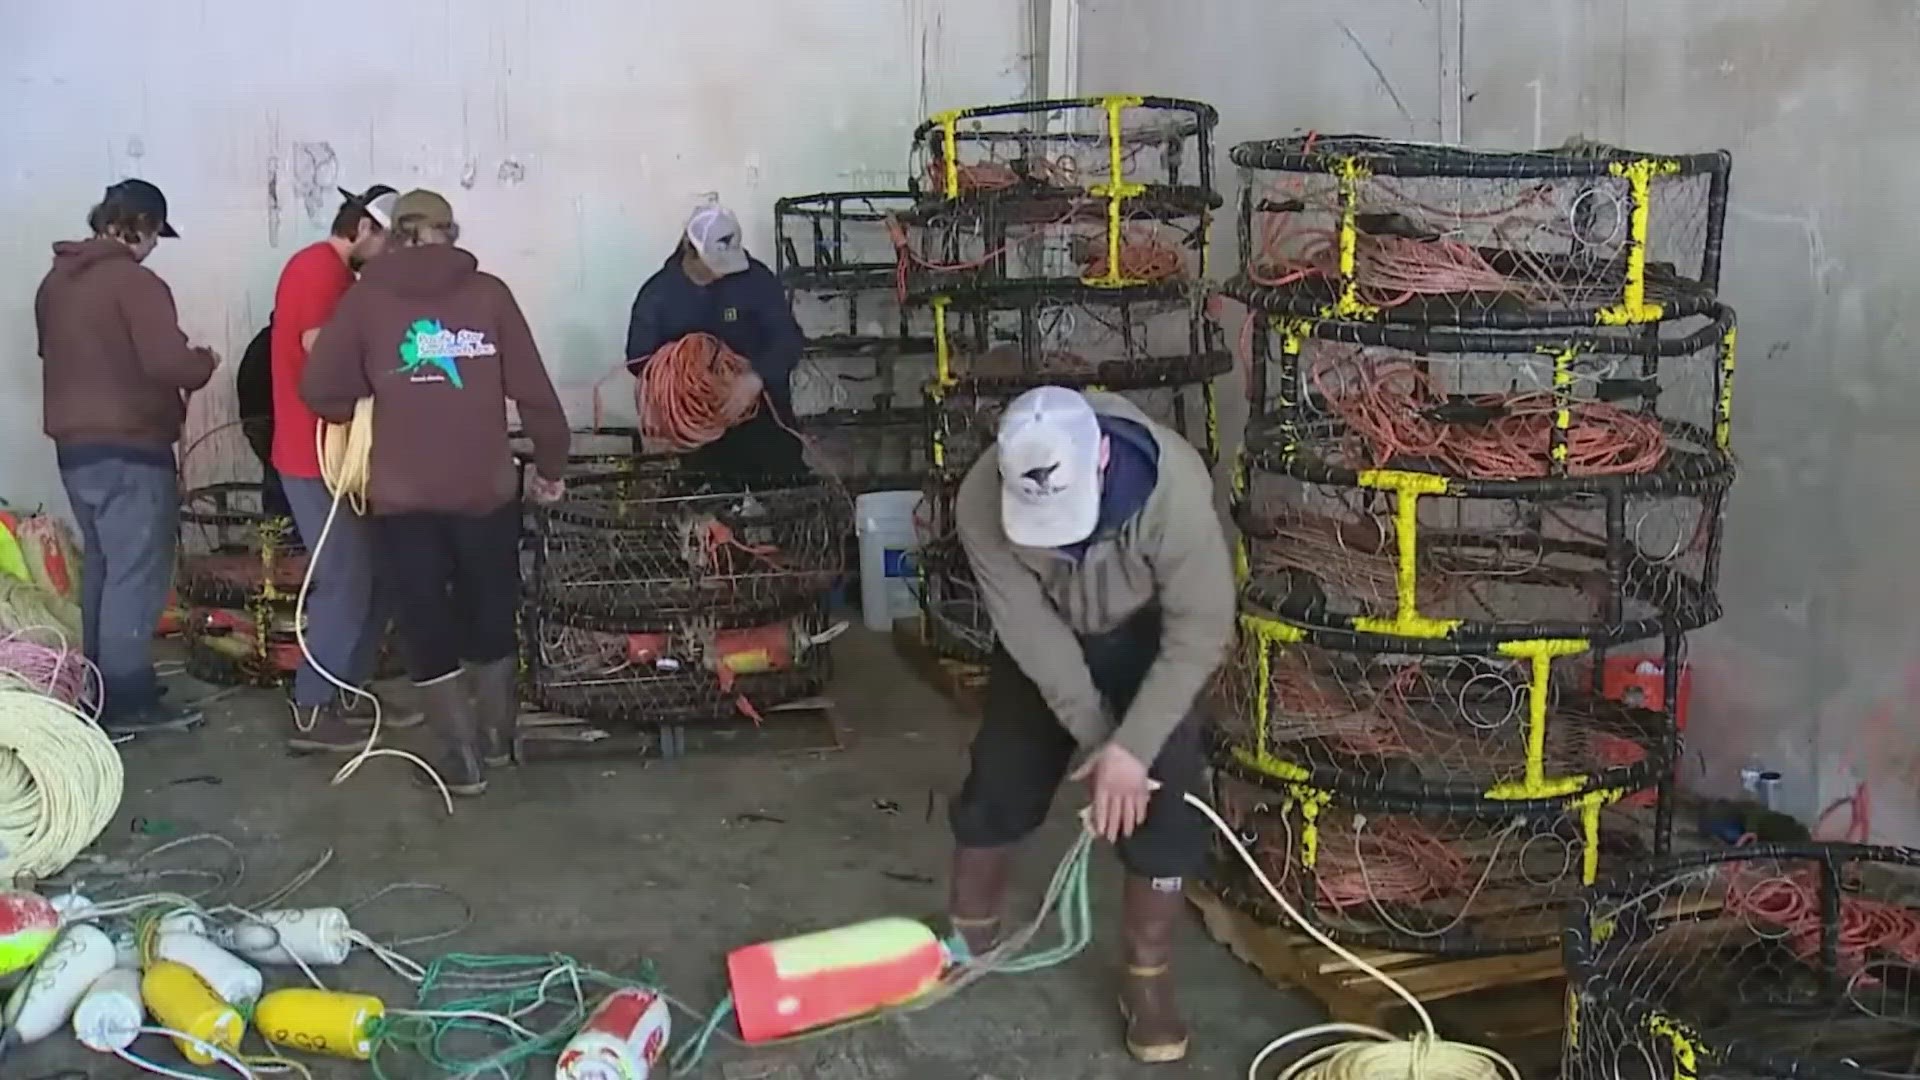 Thousands of crab pots were destroyed in the fire.